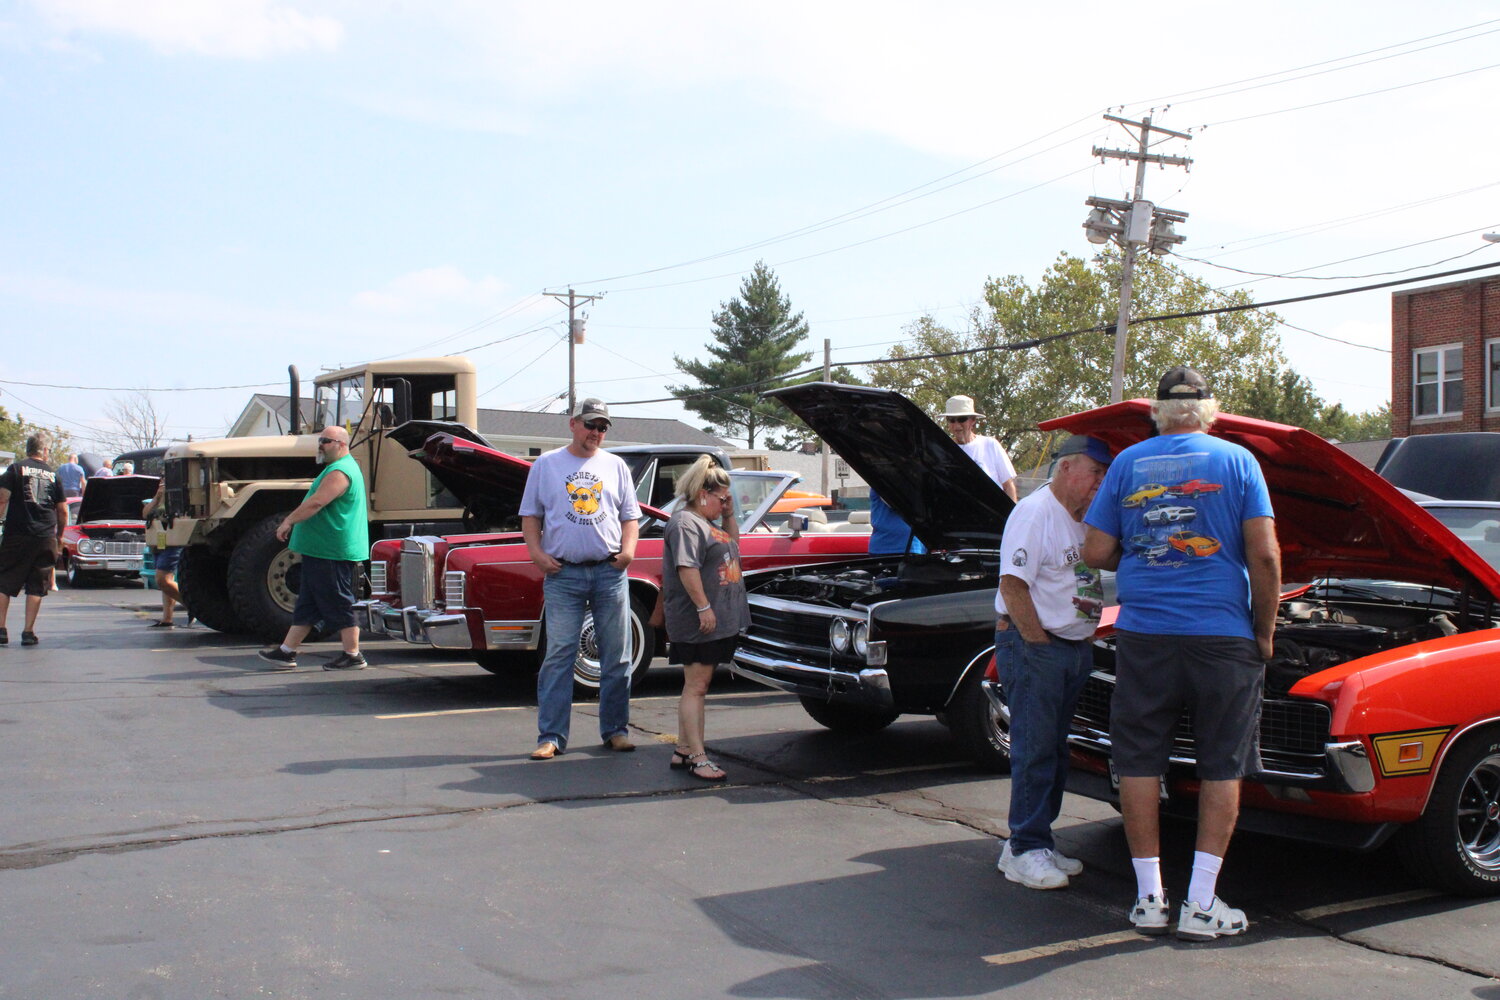 More people check out some of the cars on display at the Fall Festival.